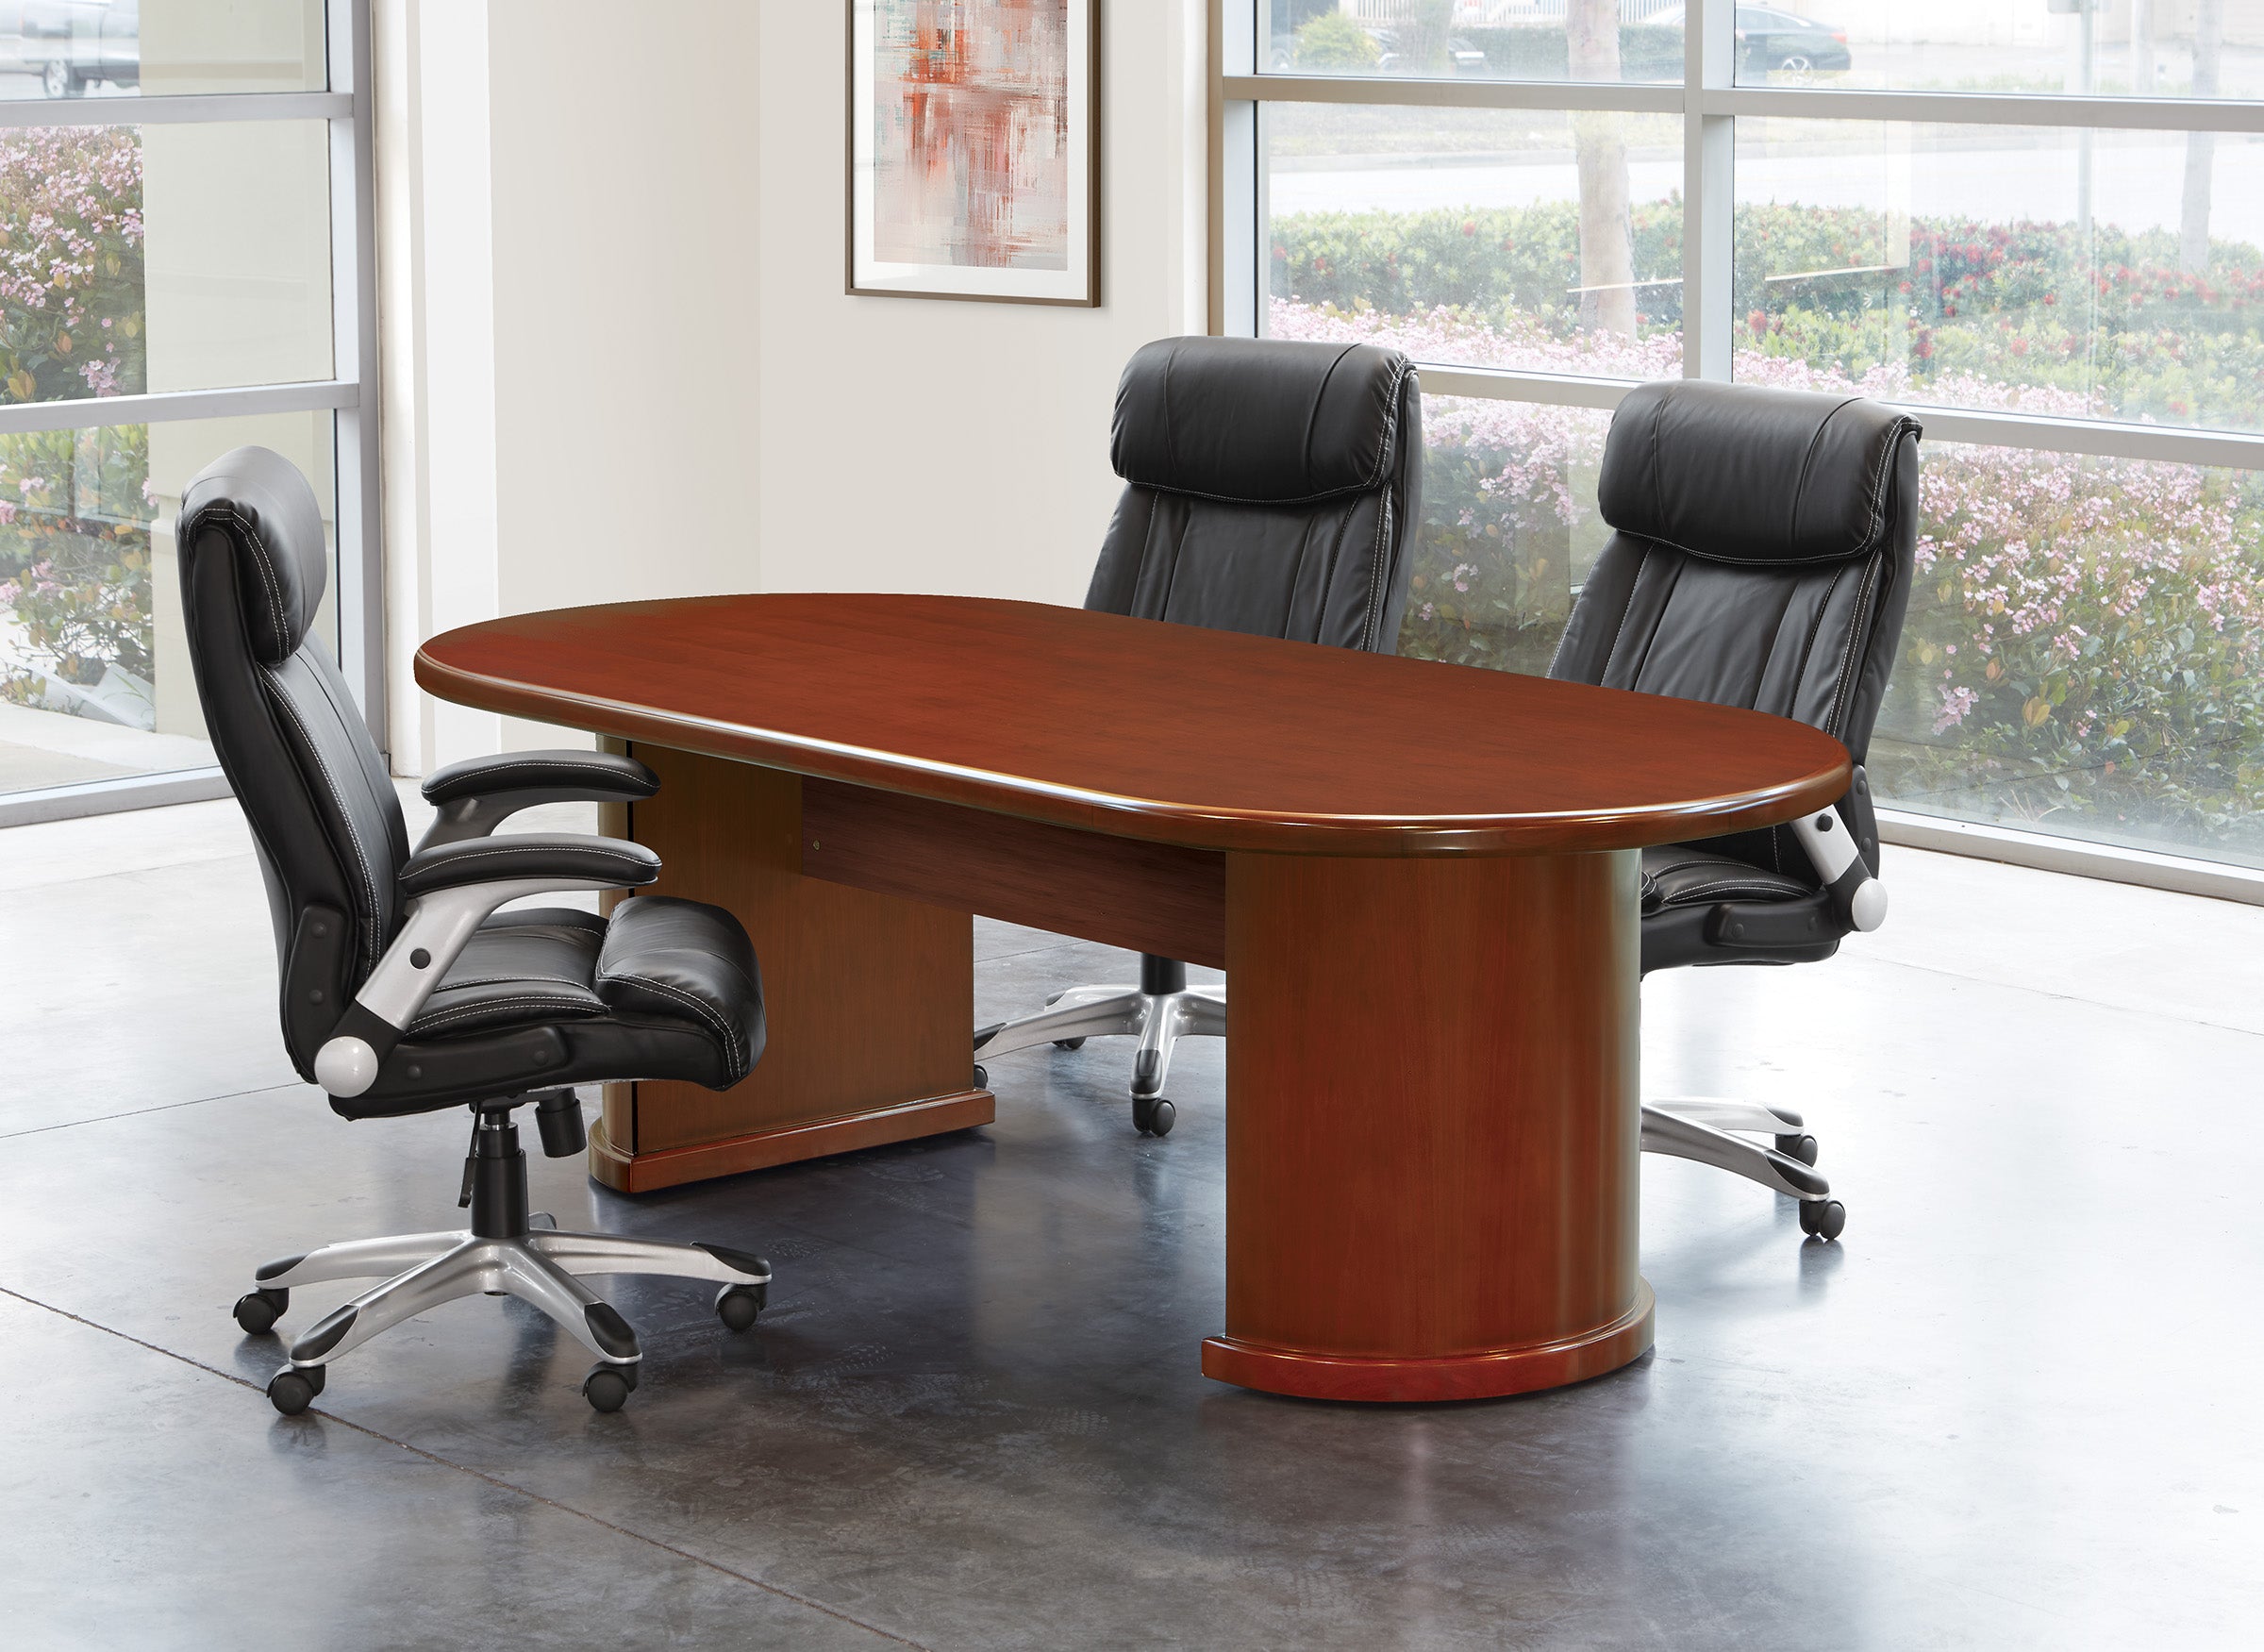 SON60 - Sonoma Racetrack 8' Conference Table by Office Star